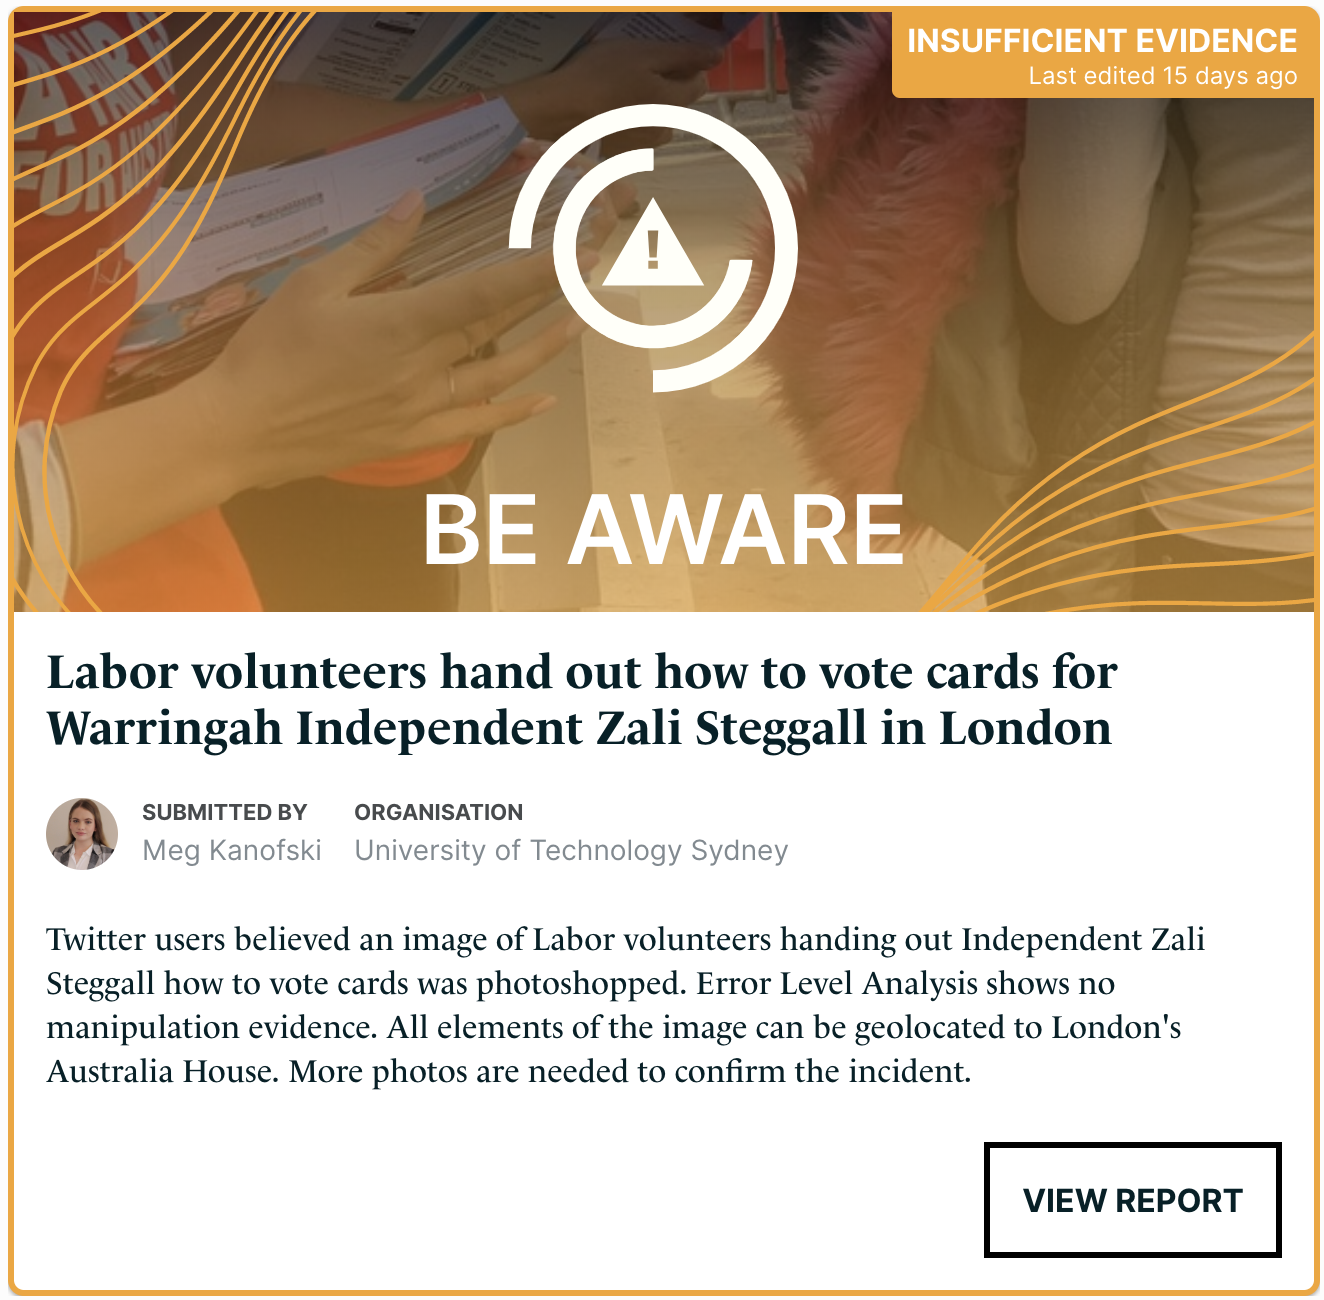 A summary card about an investigation into an image of Labor volunteers handing out cards about Independent Zali Steggall, which Twitter users speculated was photoshopped